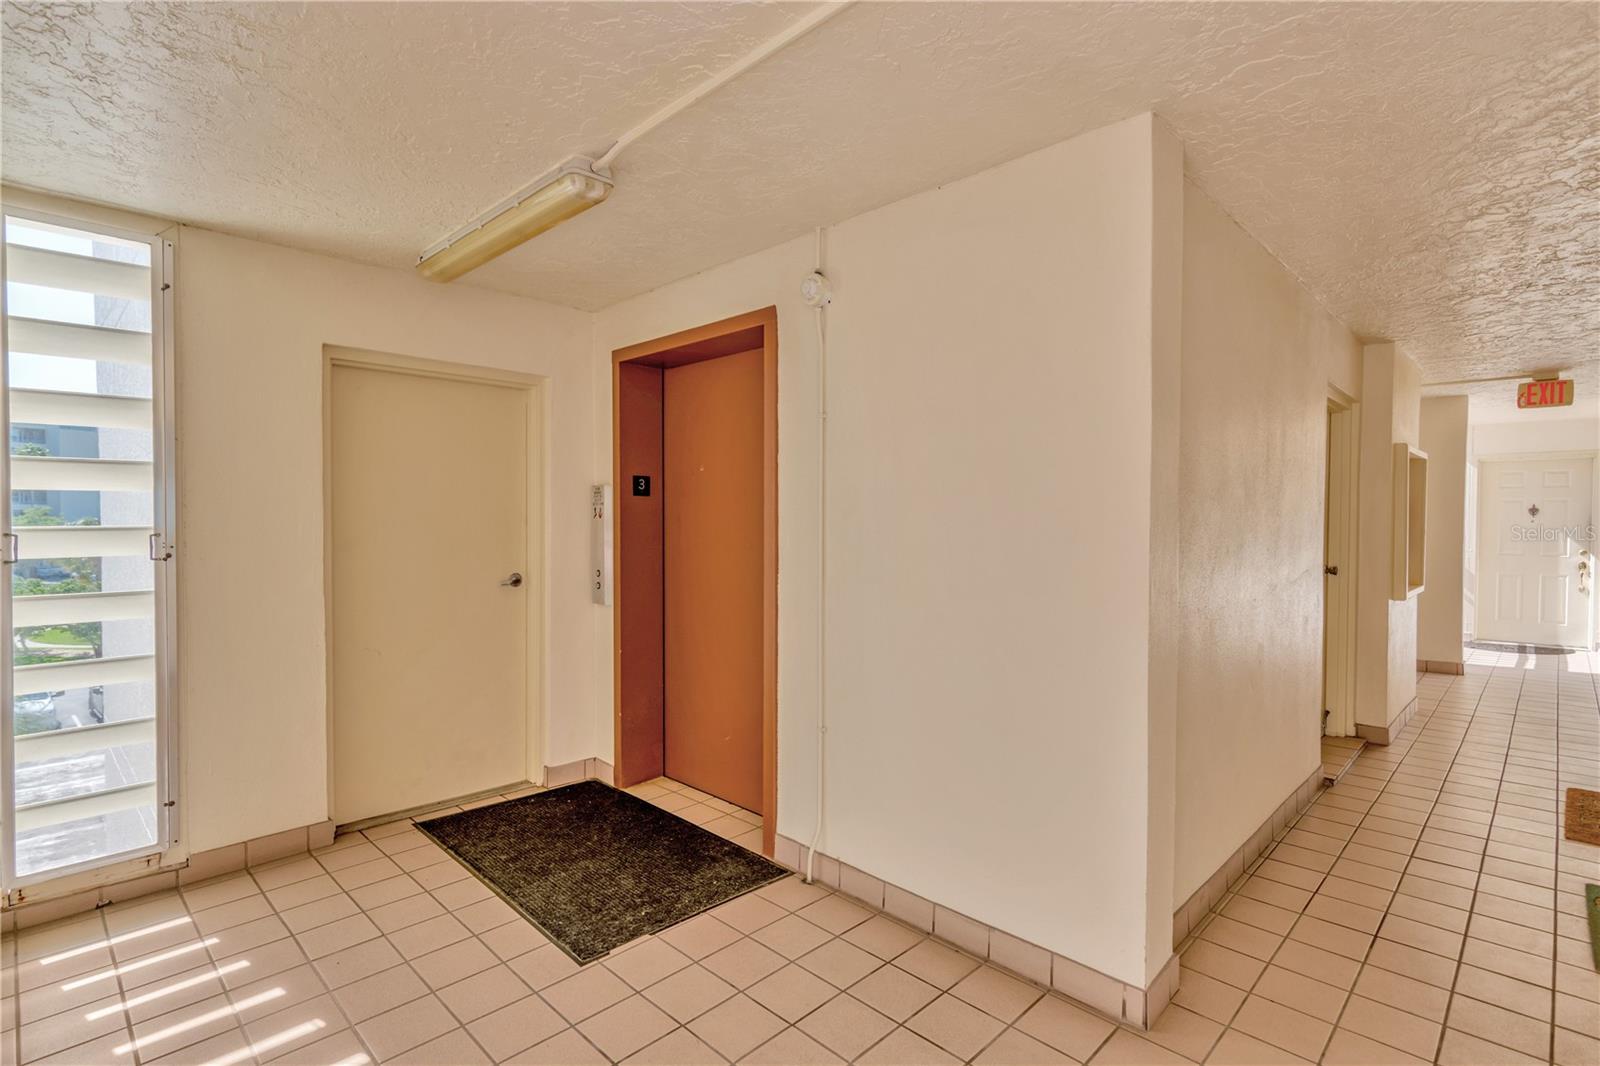 Unit 302 is located Conveniently Close to the Elevator - only steps away!